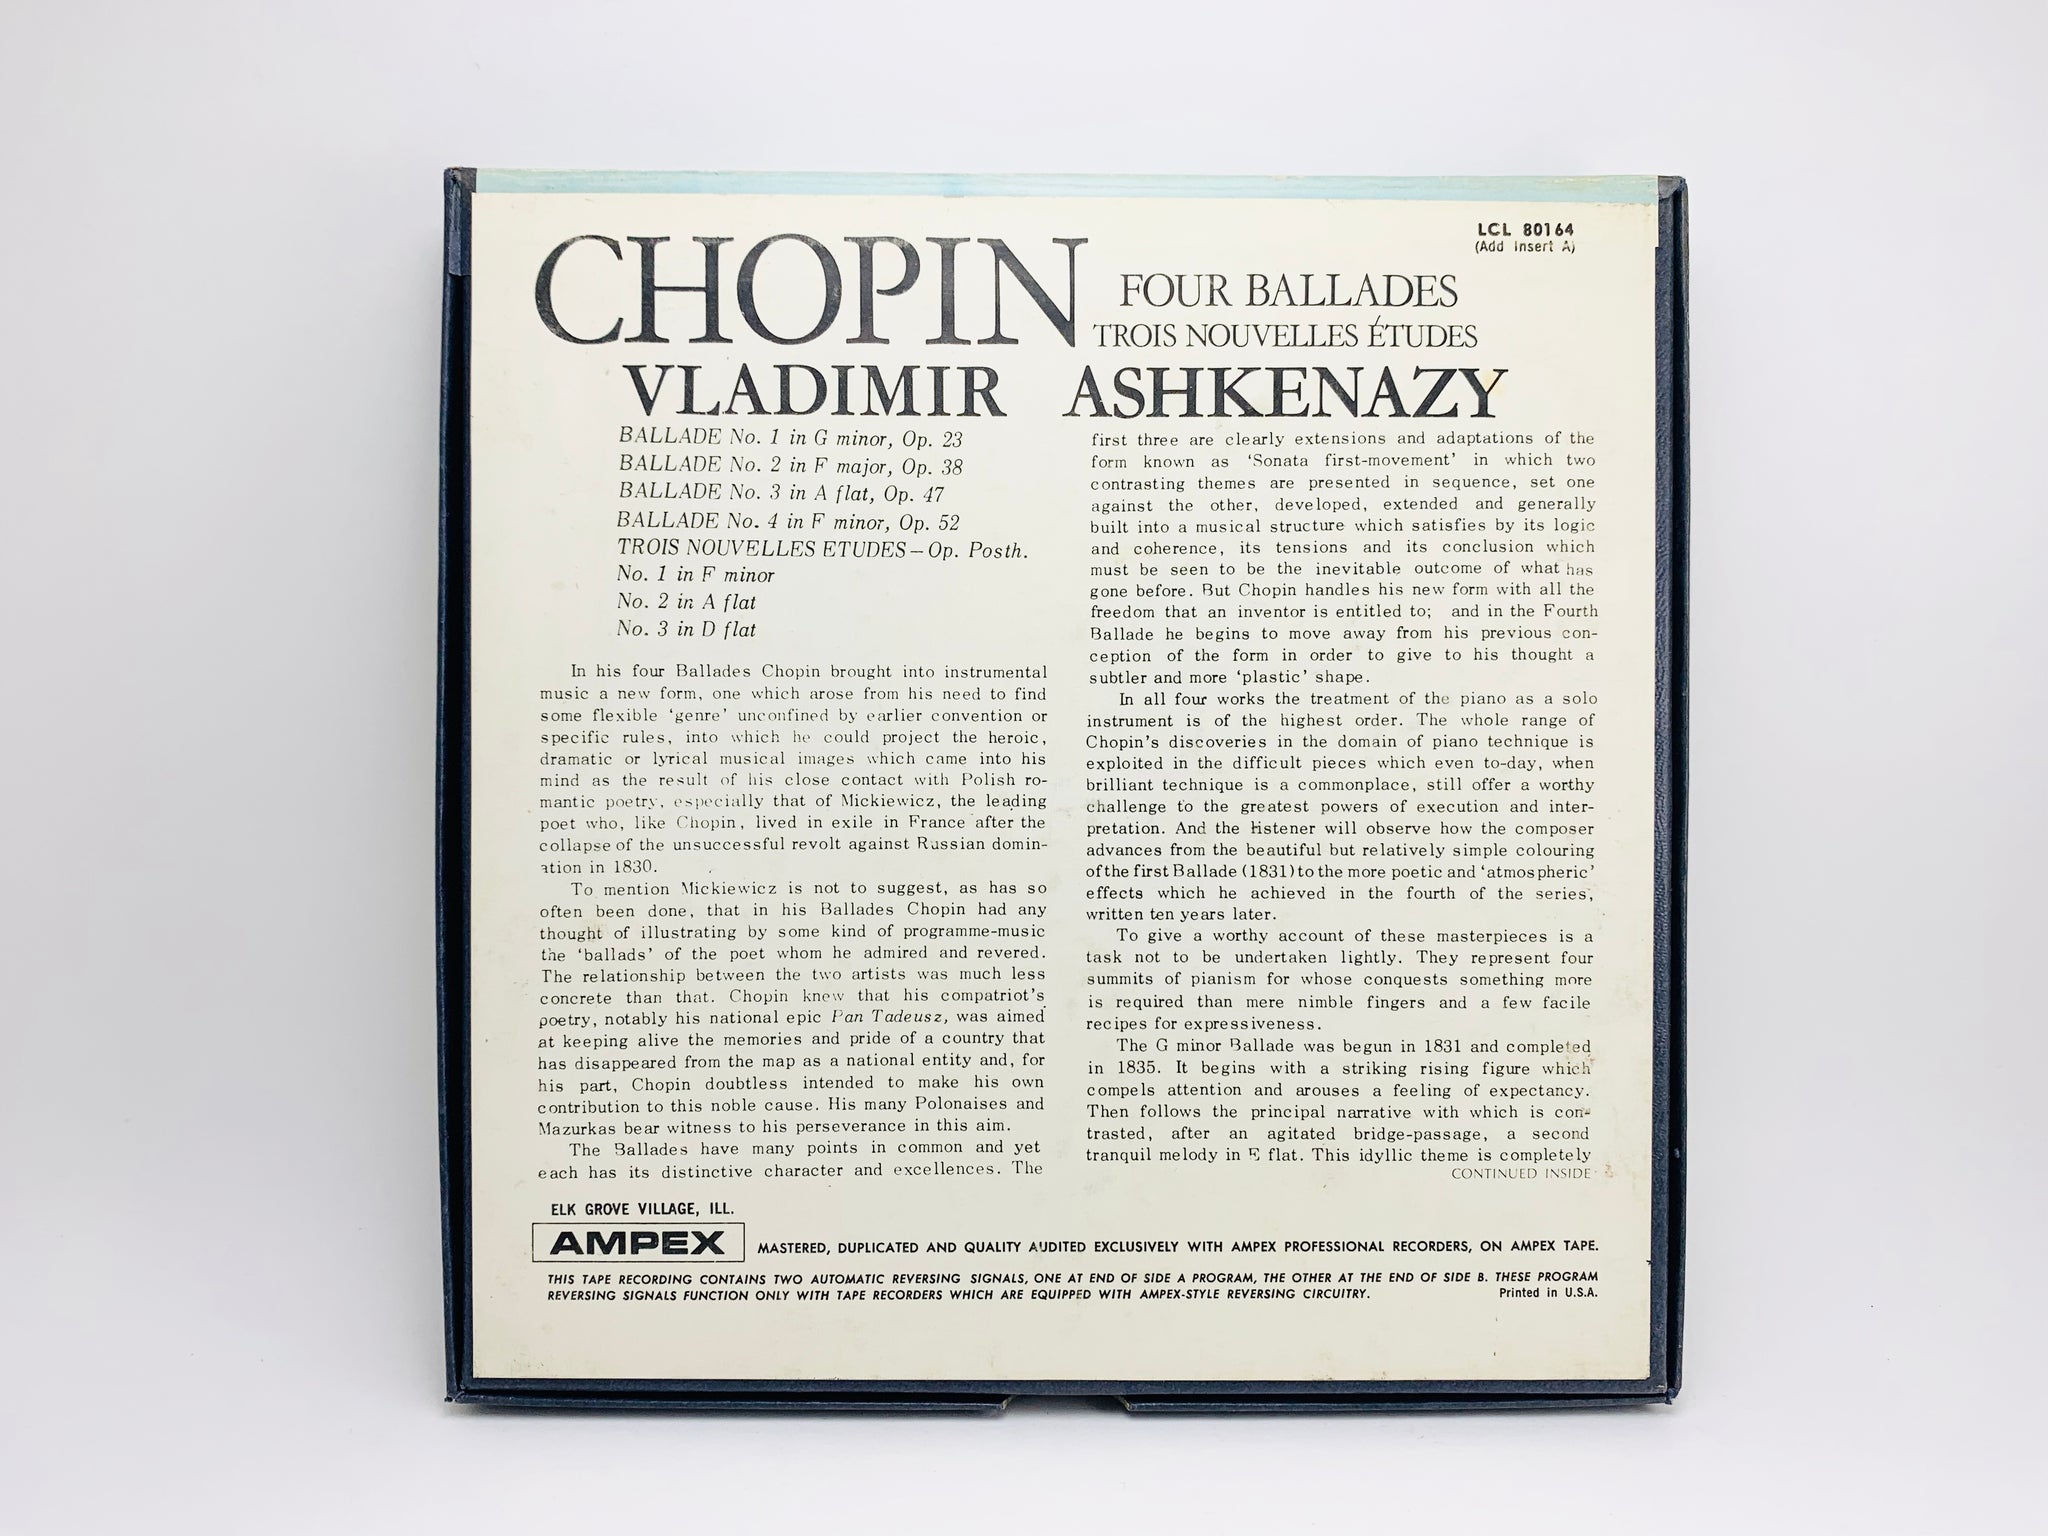 SOLD! 1960's Chopin Ashkenazy, Four Ballades Reel to Reel 4 Track